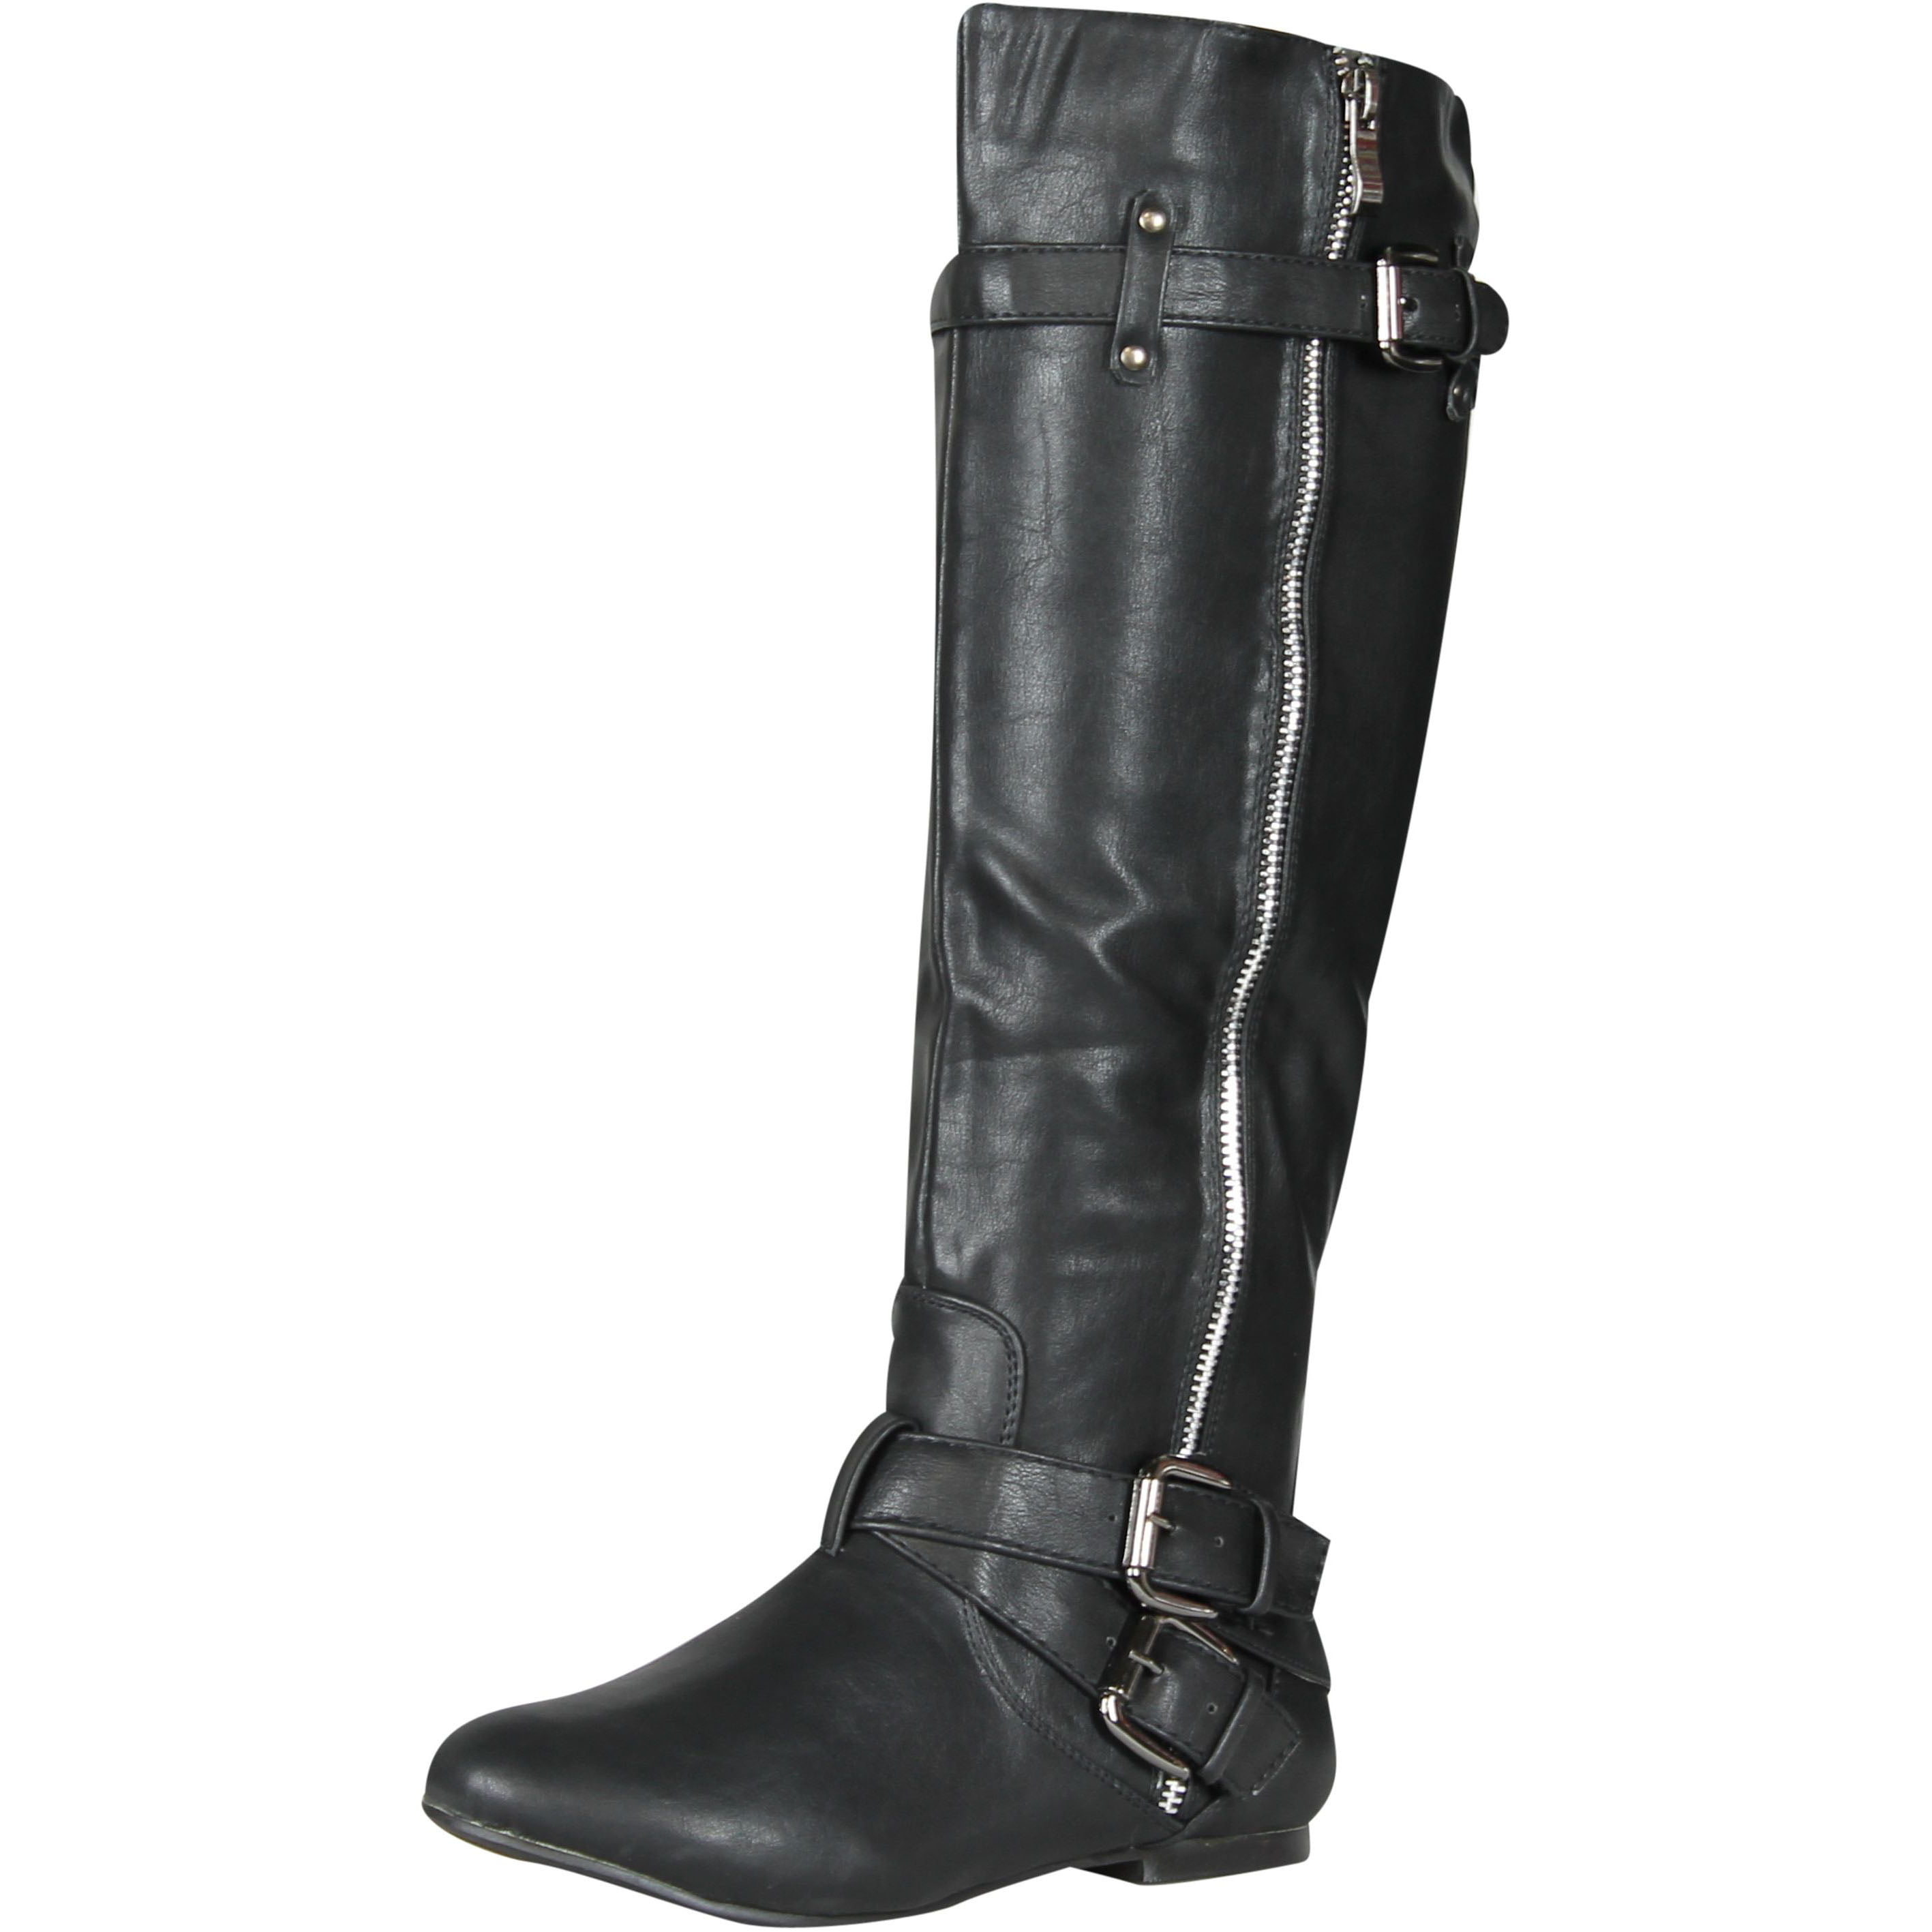 RAMPAGE BIANA Women's Boots Black Knee High Pull On Dress Casual Riding Boots 